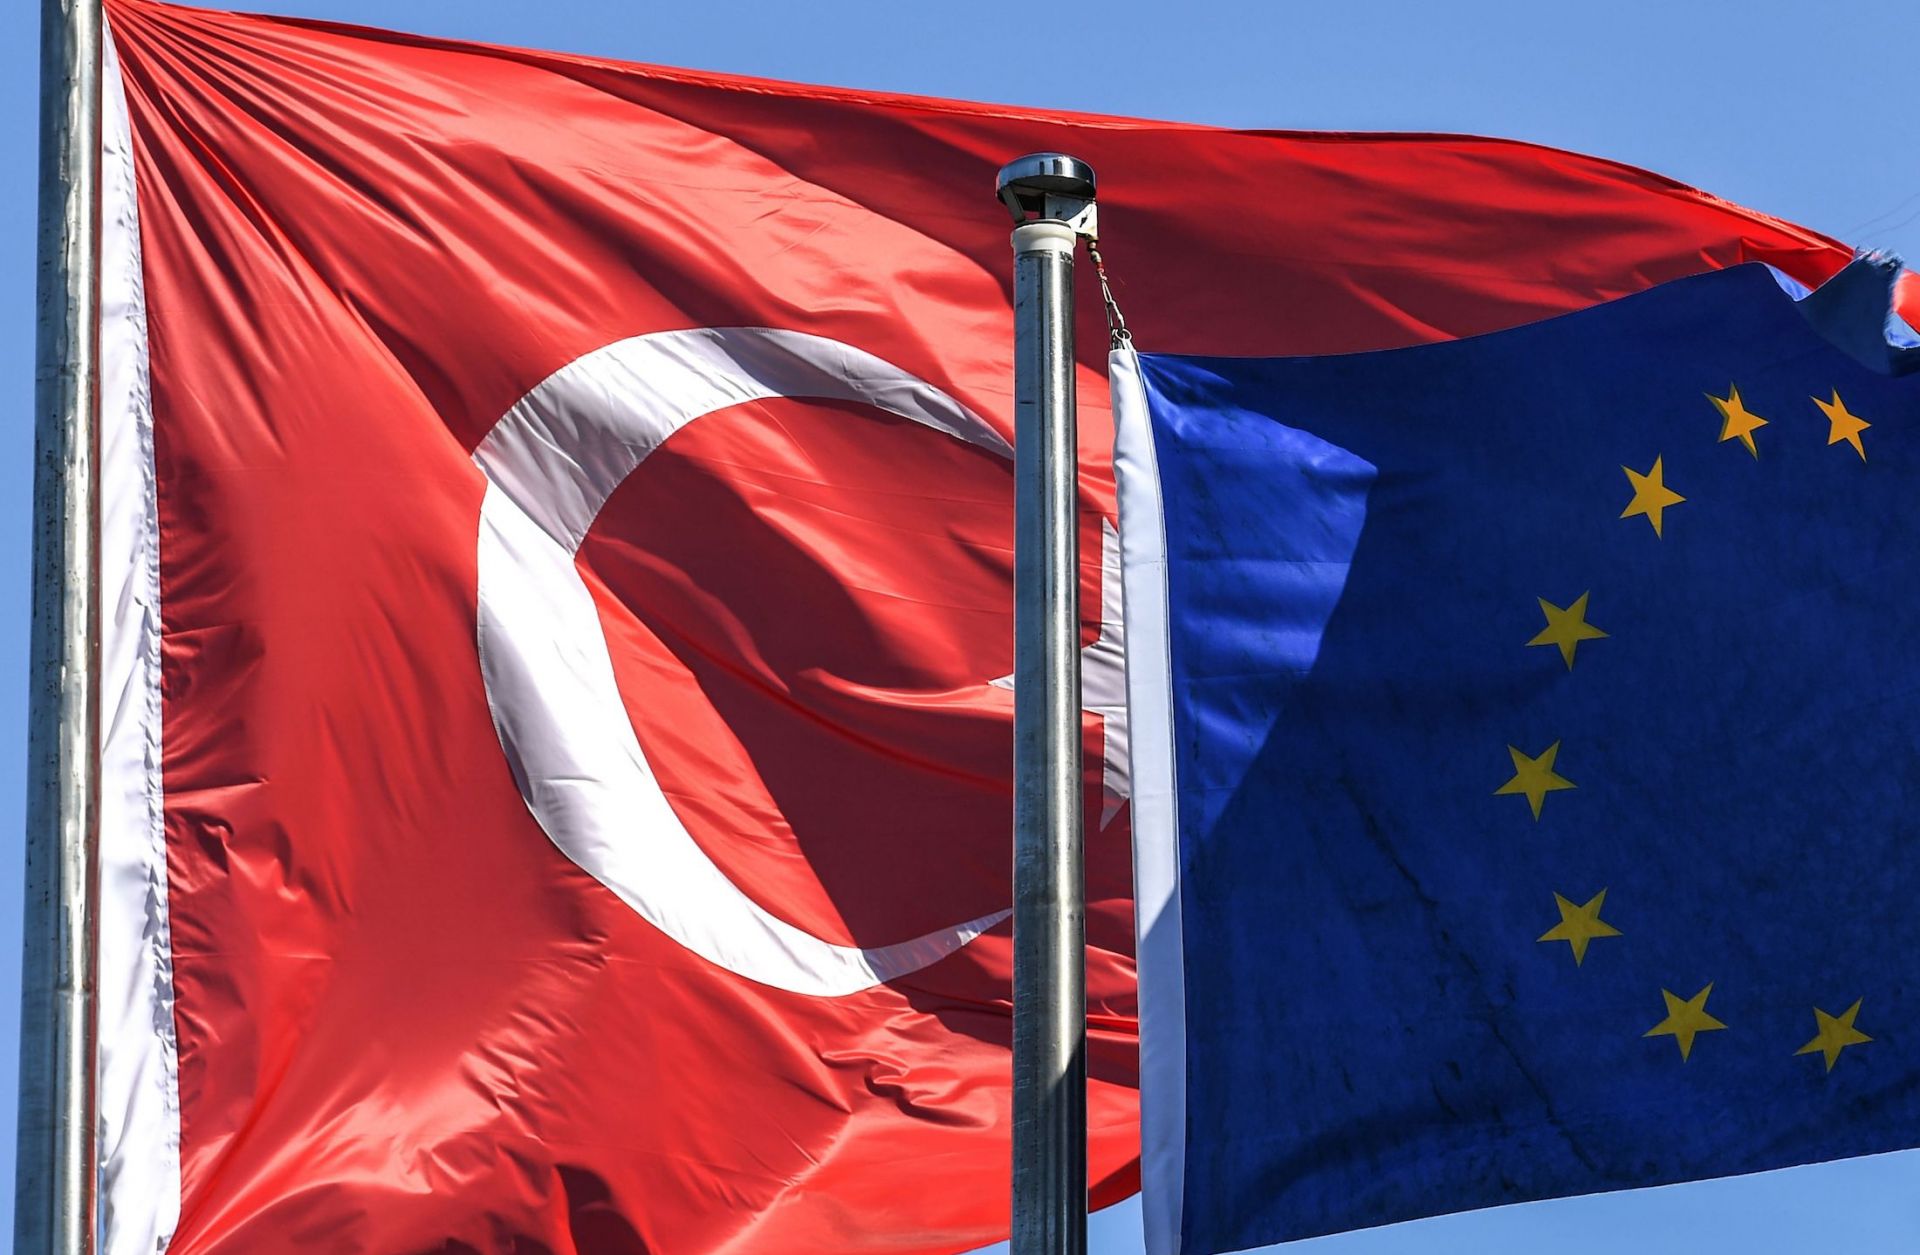 The Turkish and EU flags Aug. 15, 2018, in Istanbul's financial and business district of Maslak.